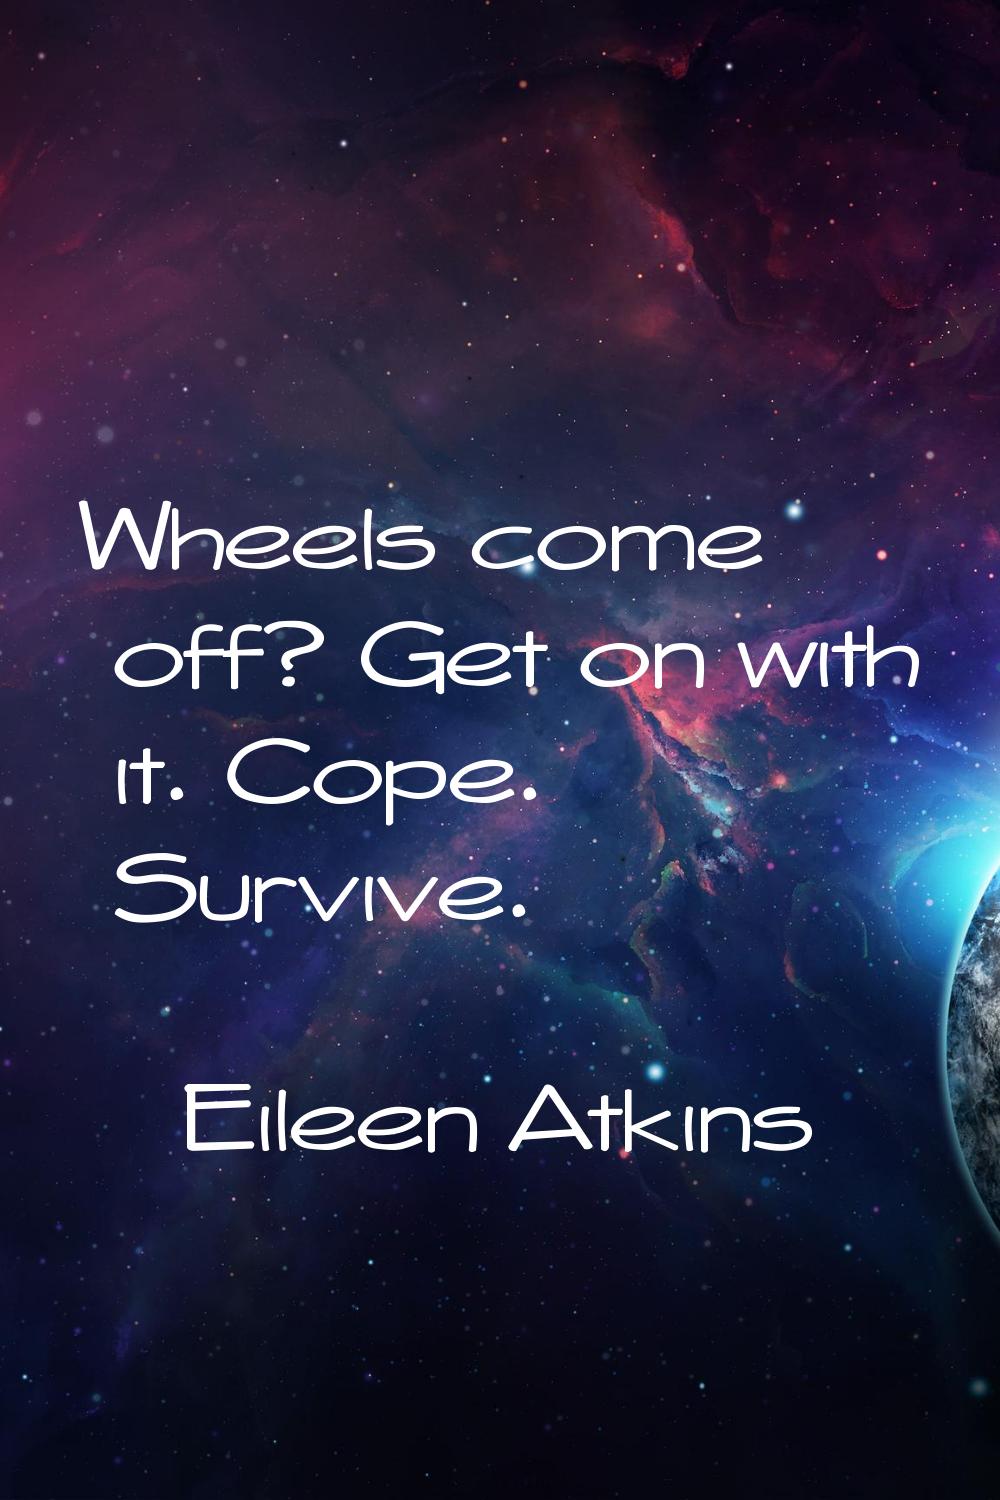 Wheels come off? Get on with it. Cope. Survive.